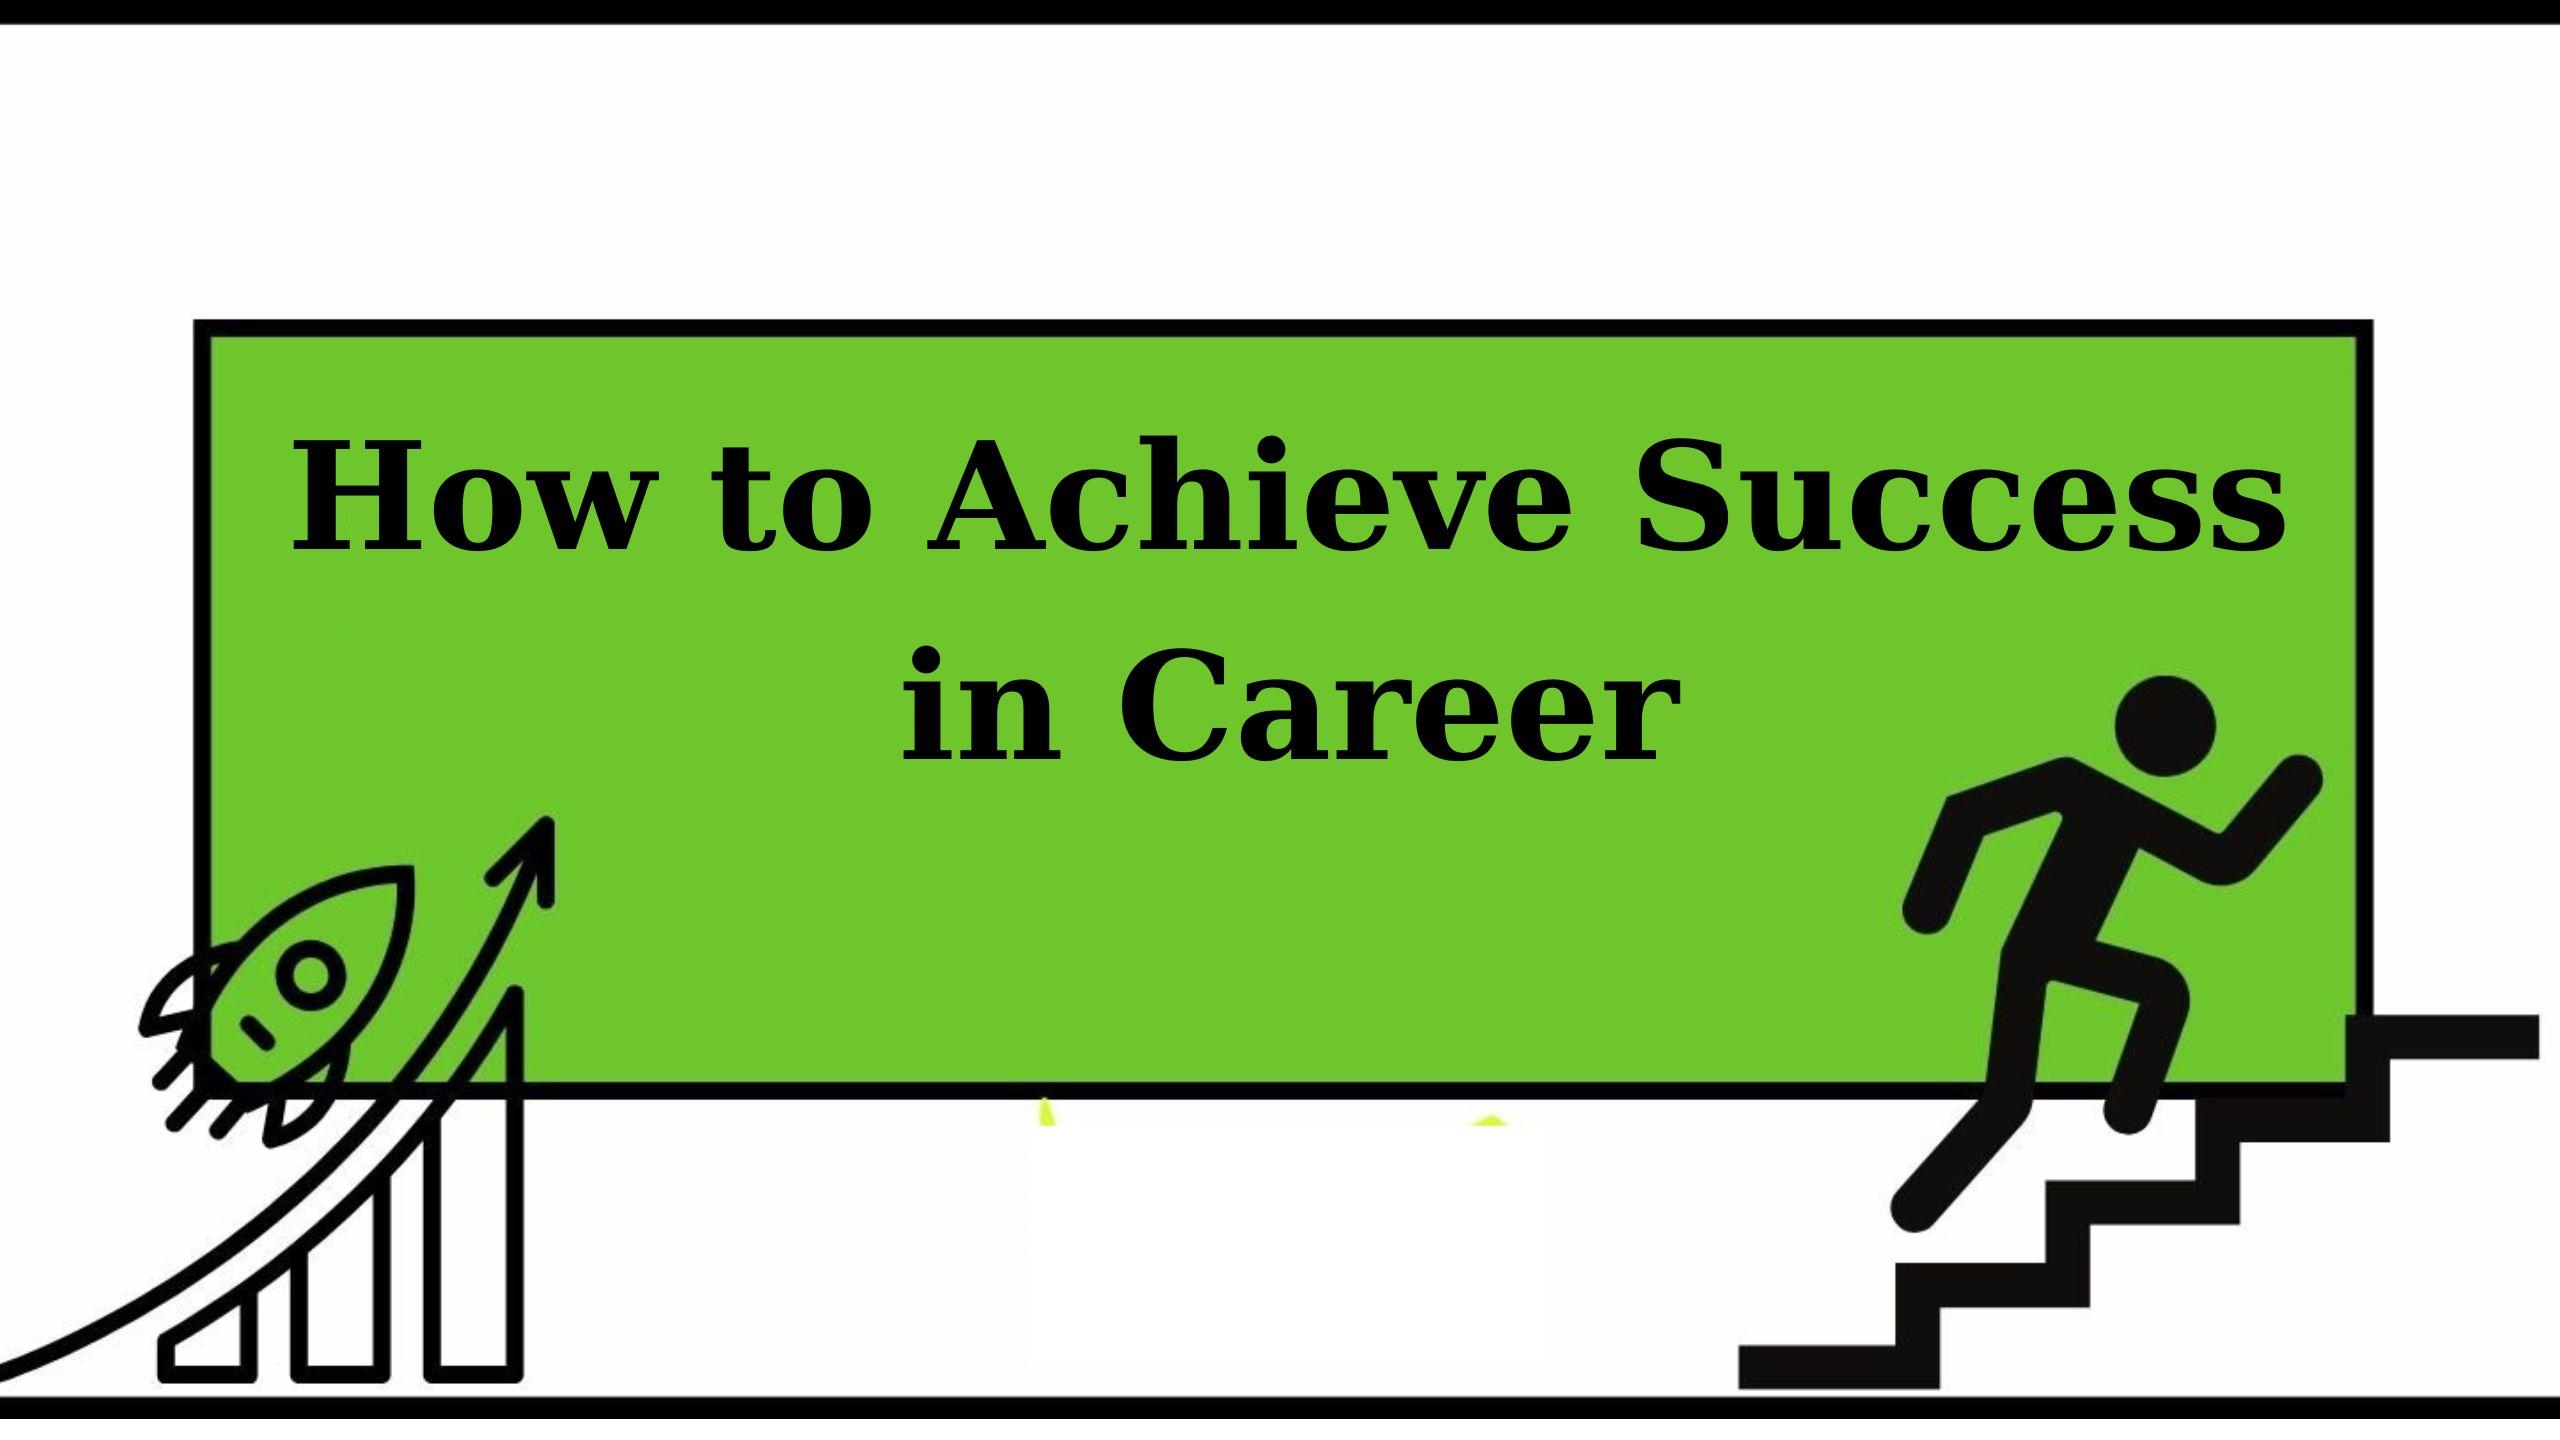 How to Achieve Success in Career